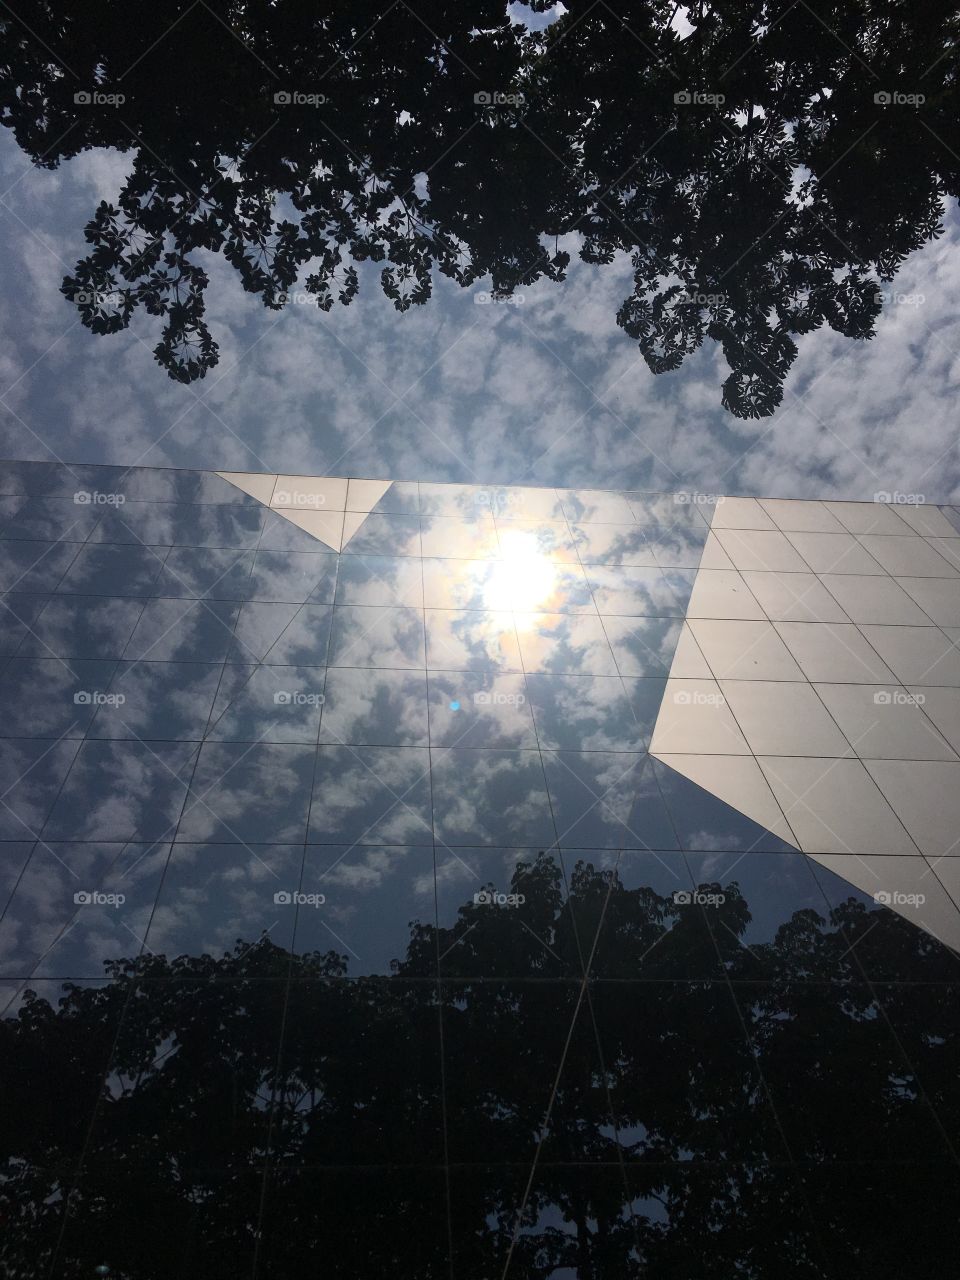 Here is a twist! Half of the picture is actual sky and other half is the reflection of sky in a glass building! 